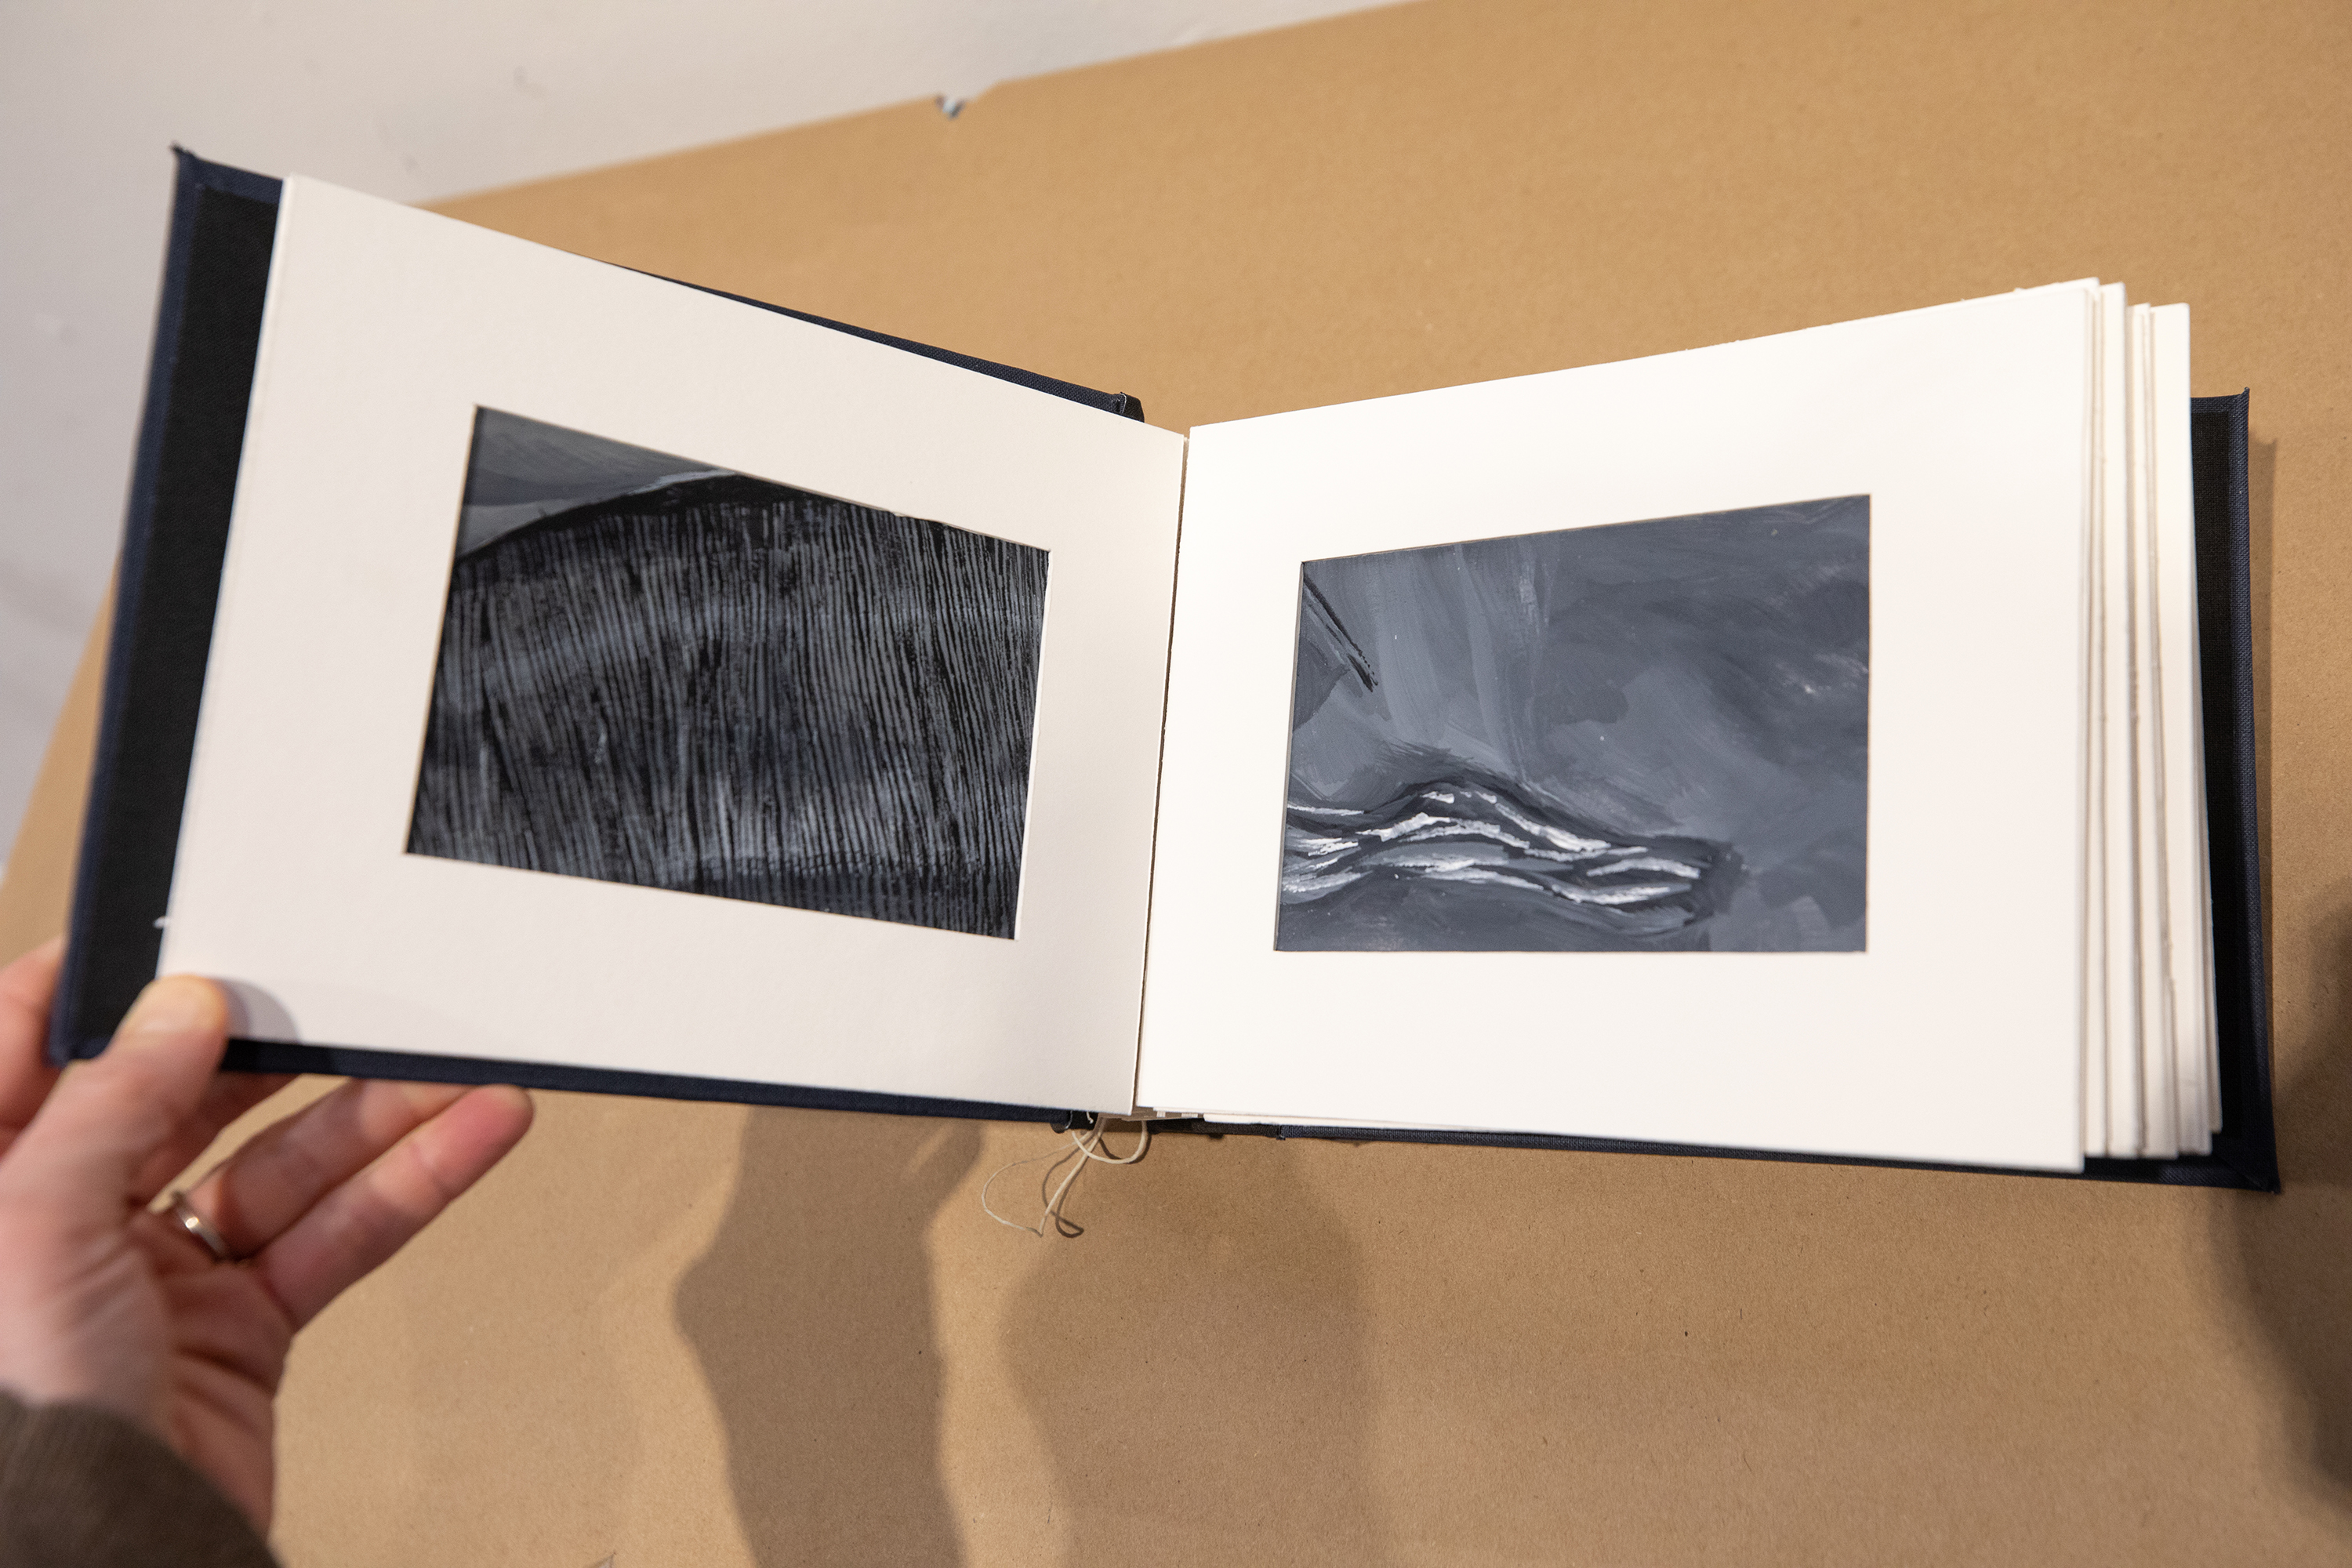 artist's book on whale bone and women's corsets